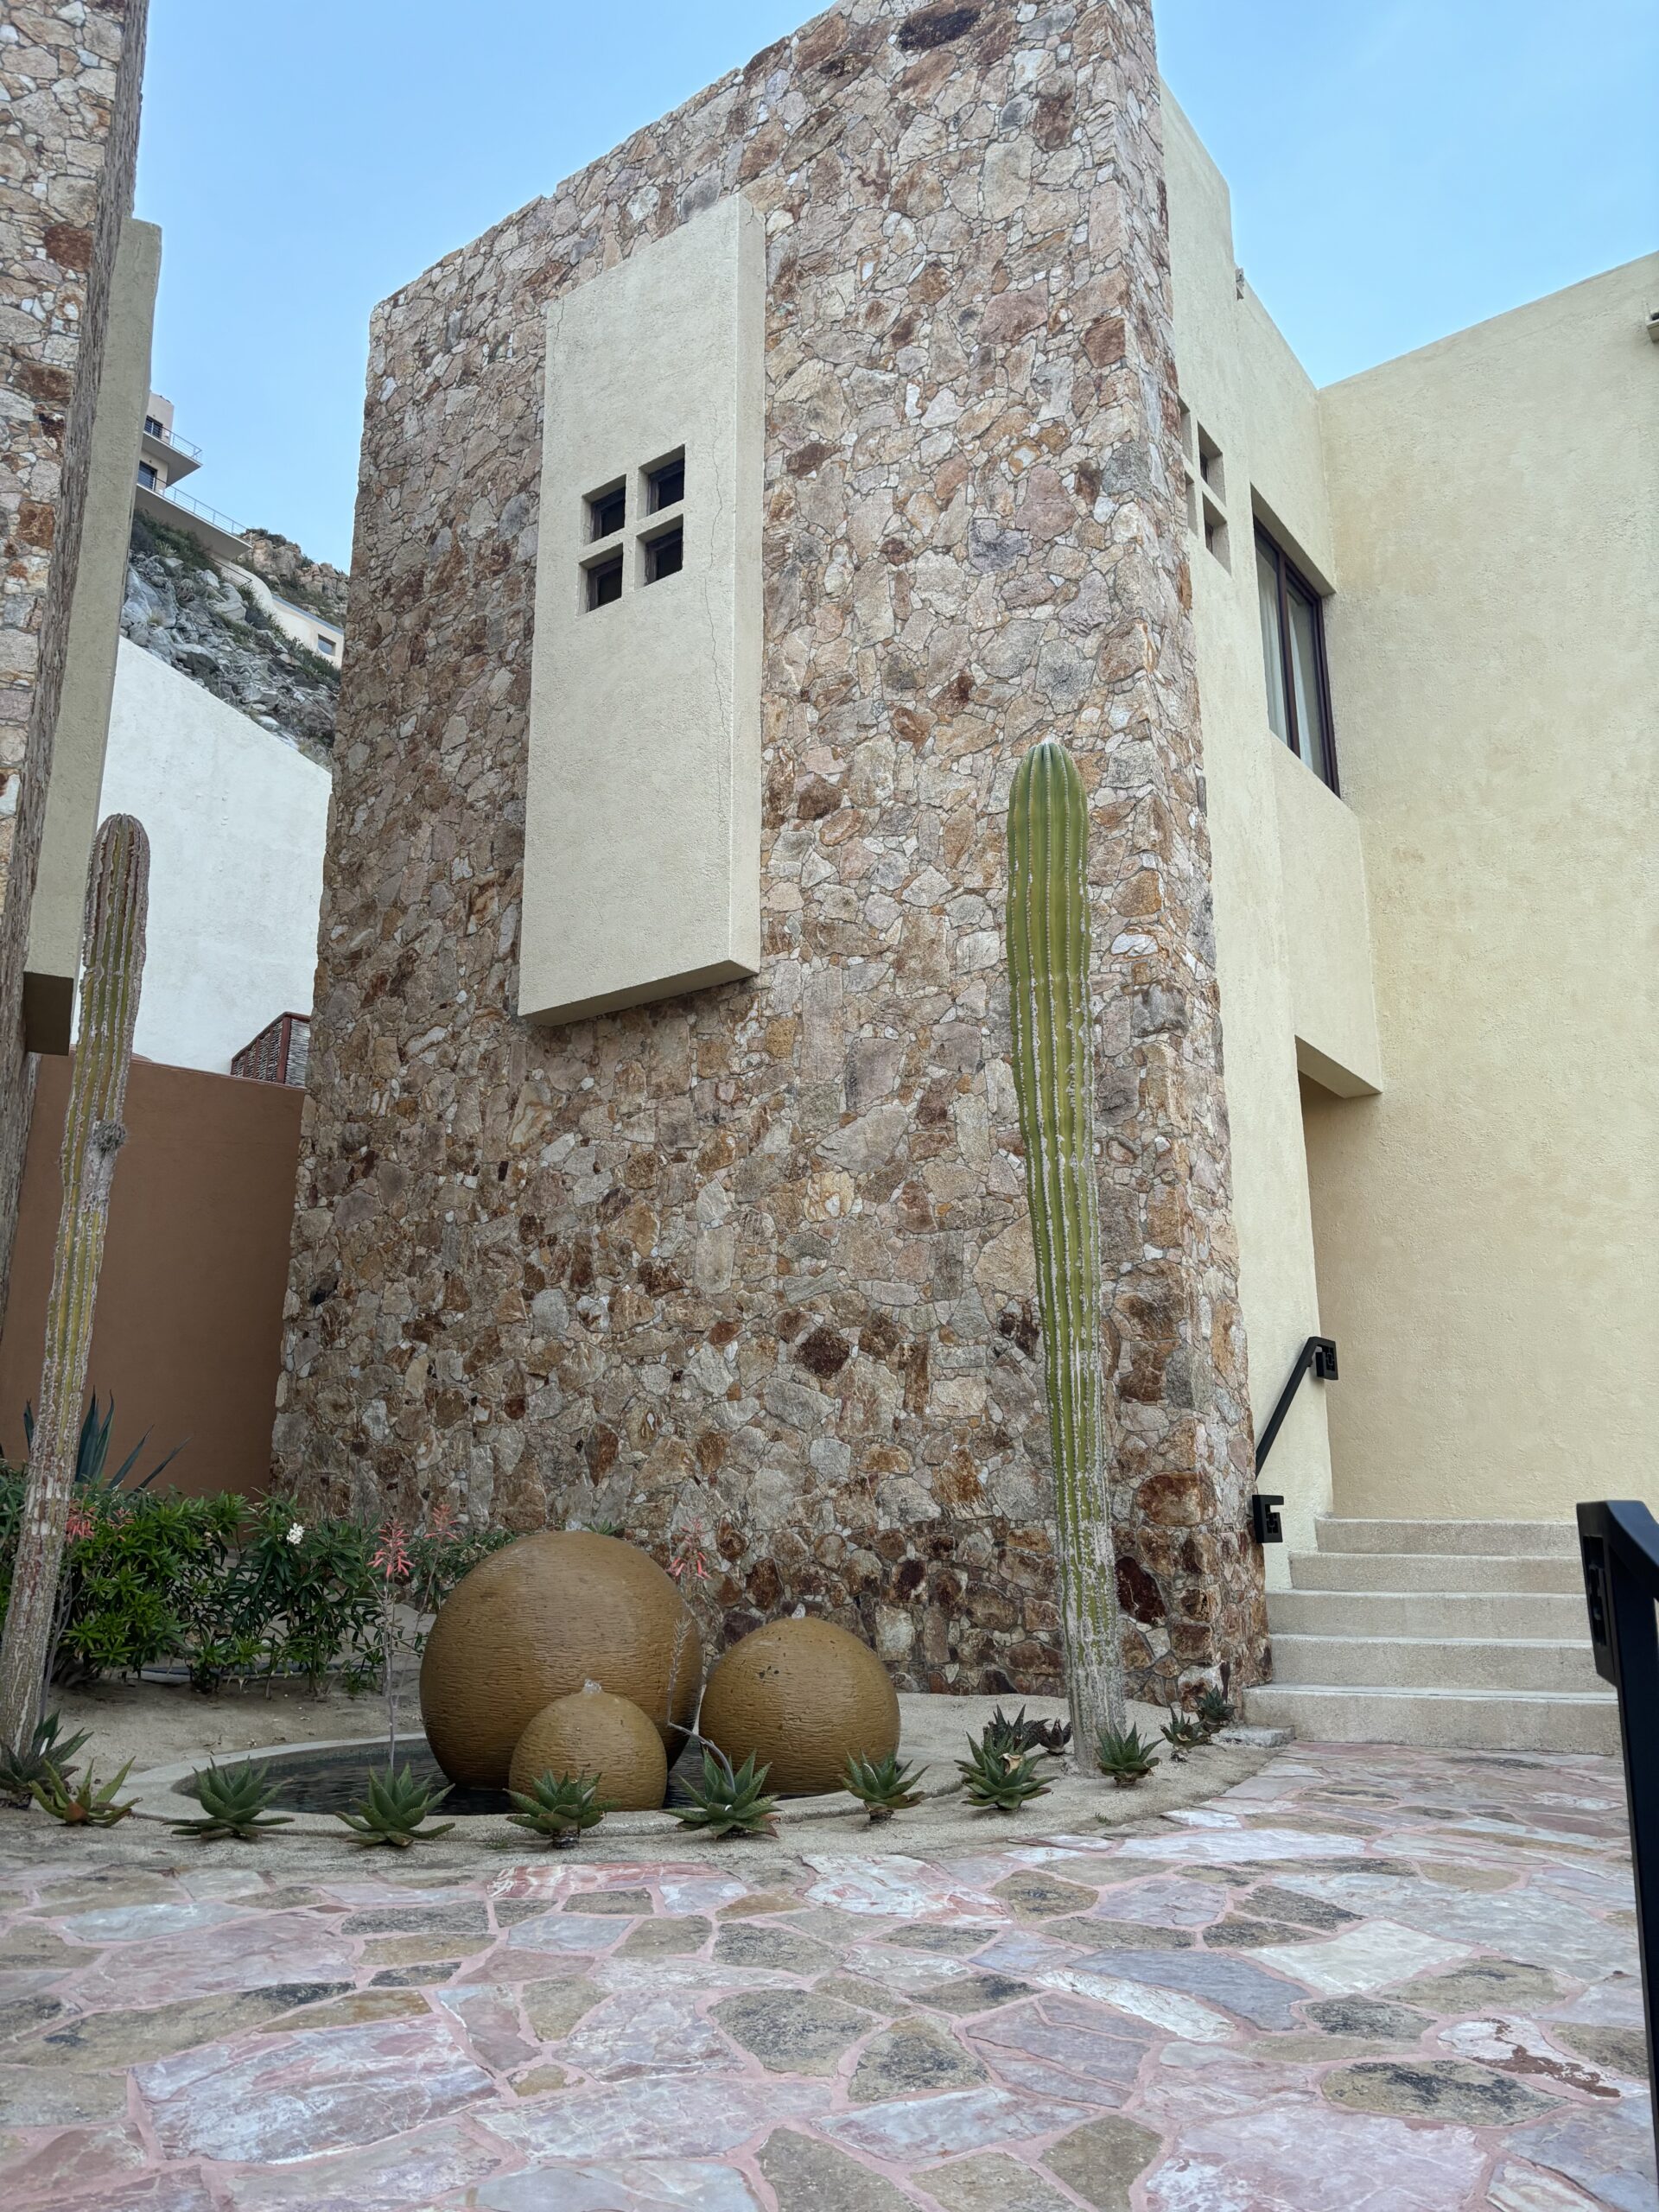 a stone tower with cactus in front of it